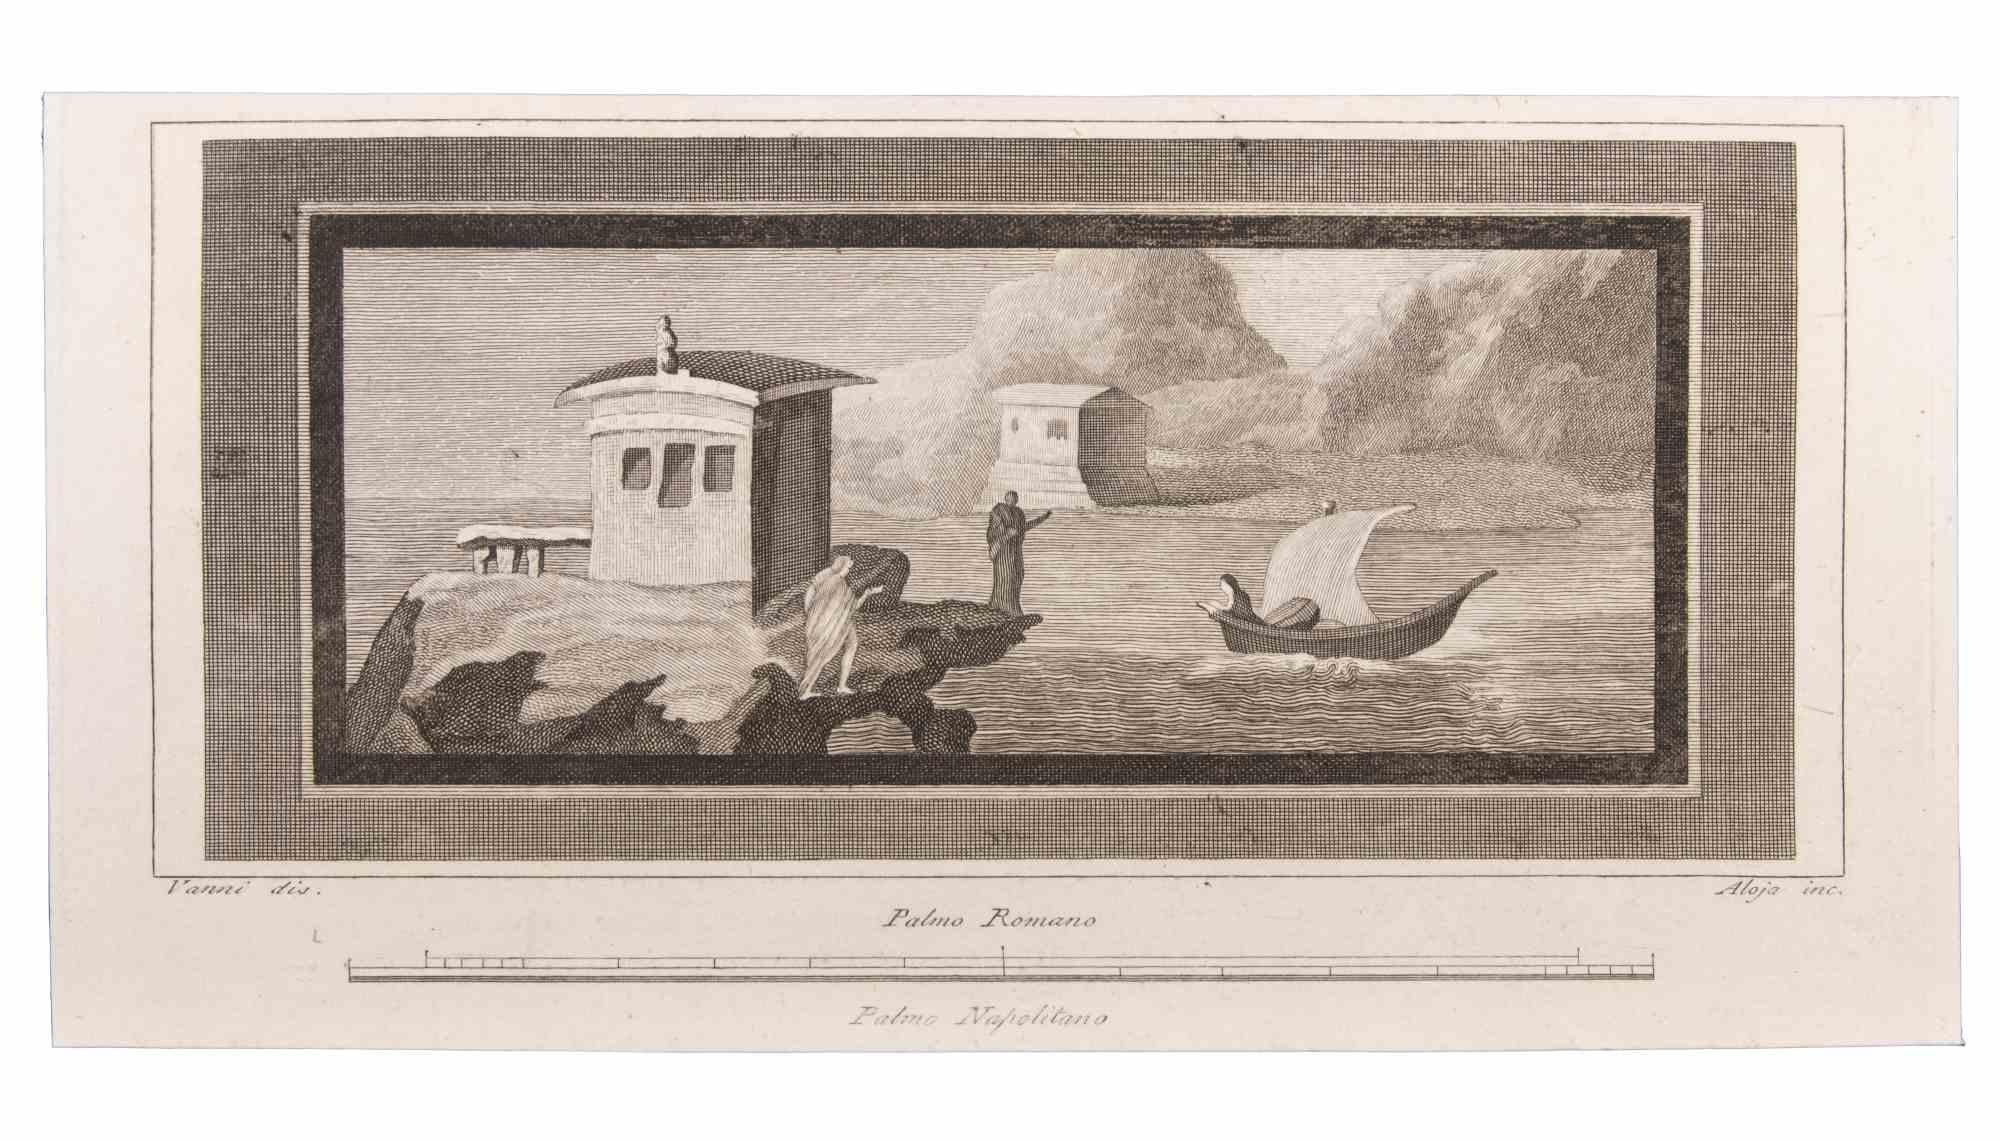 Seascape With Monument and Figures is an Etching realized by  Luigi Aloja (1783-1837).

The etching belongs to the print suite “Antiquities of Herculaneum Exposed” (original title: “Le Antichità di Ercolano Esposte”), an eight-volume volume of